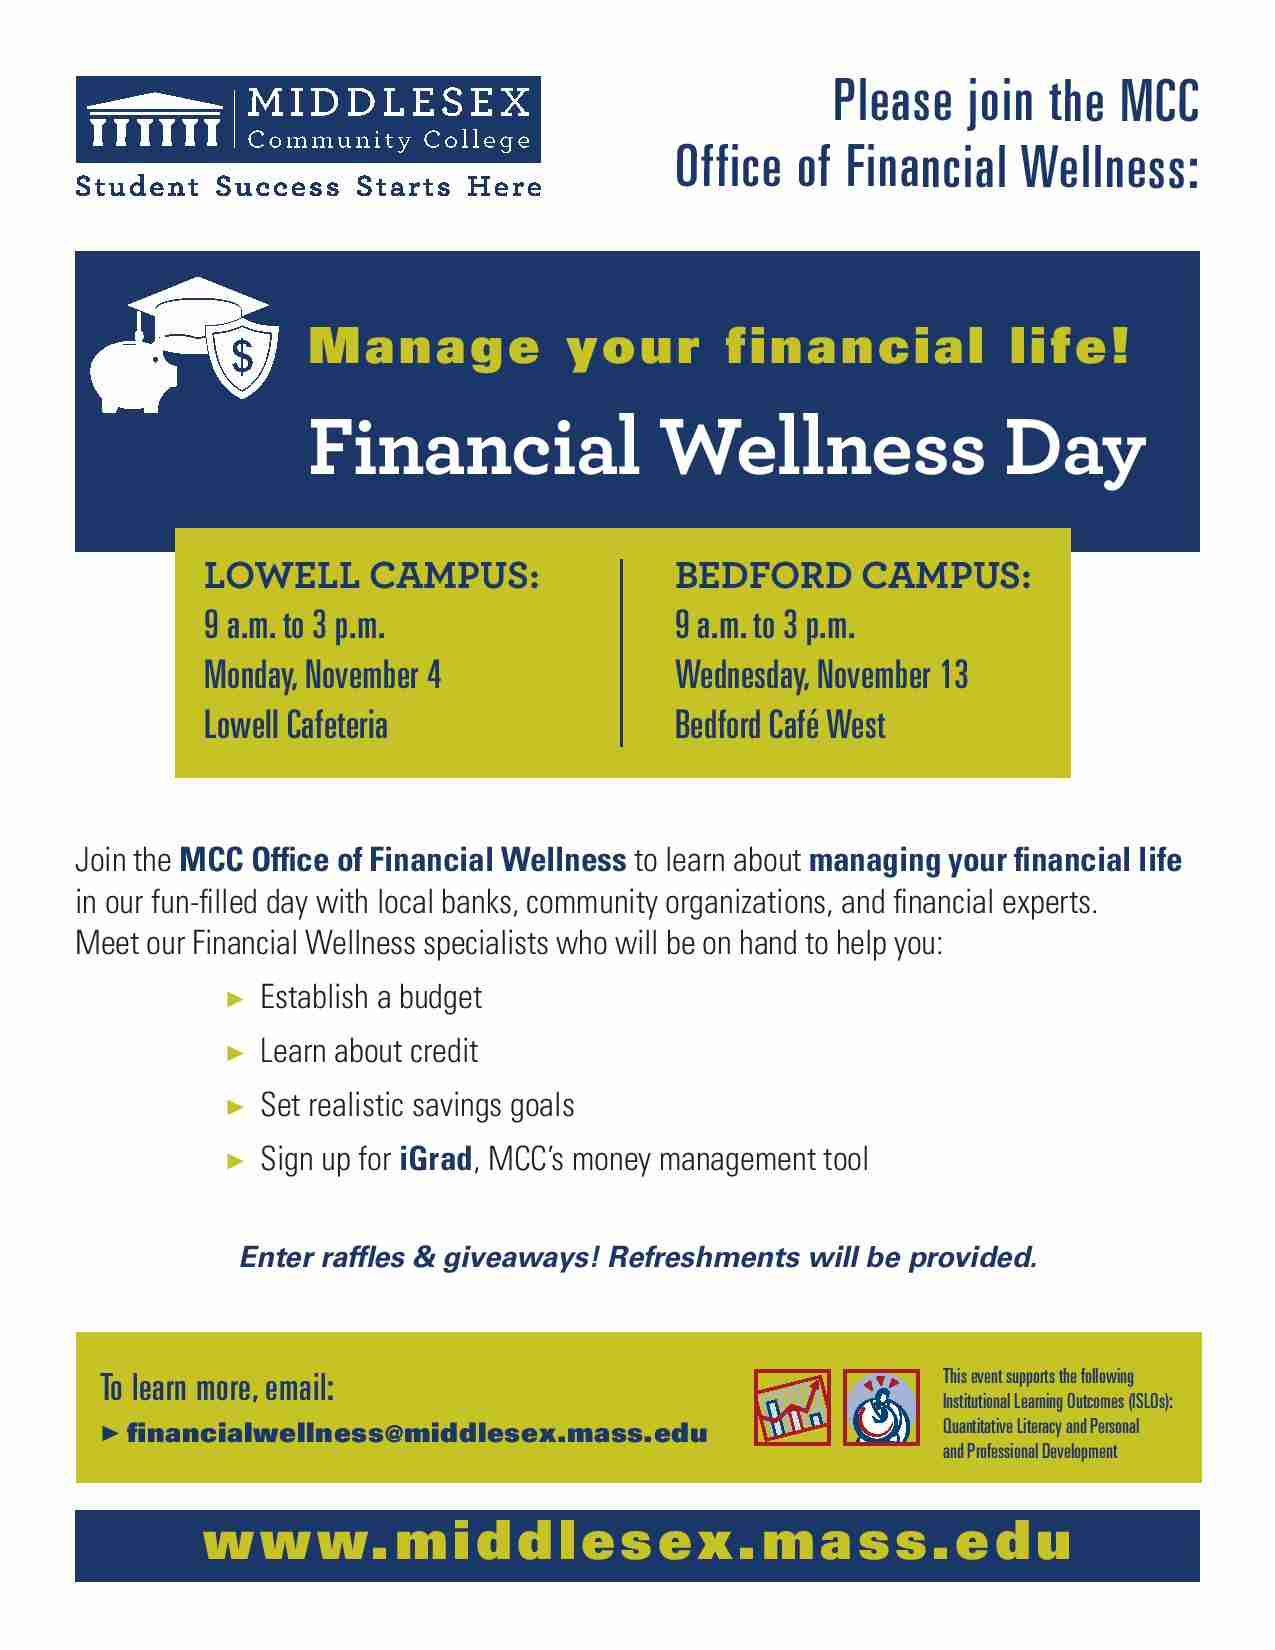 Financial Wellness Day Flier inviting students to join us in a fun-filled day with local banks and community organizations, in which students also had the opportunity to check their financial health and sign up for iGrad and Touchnet.